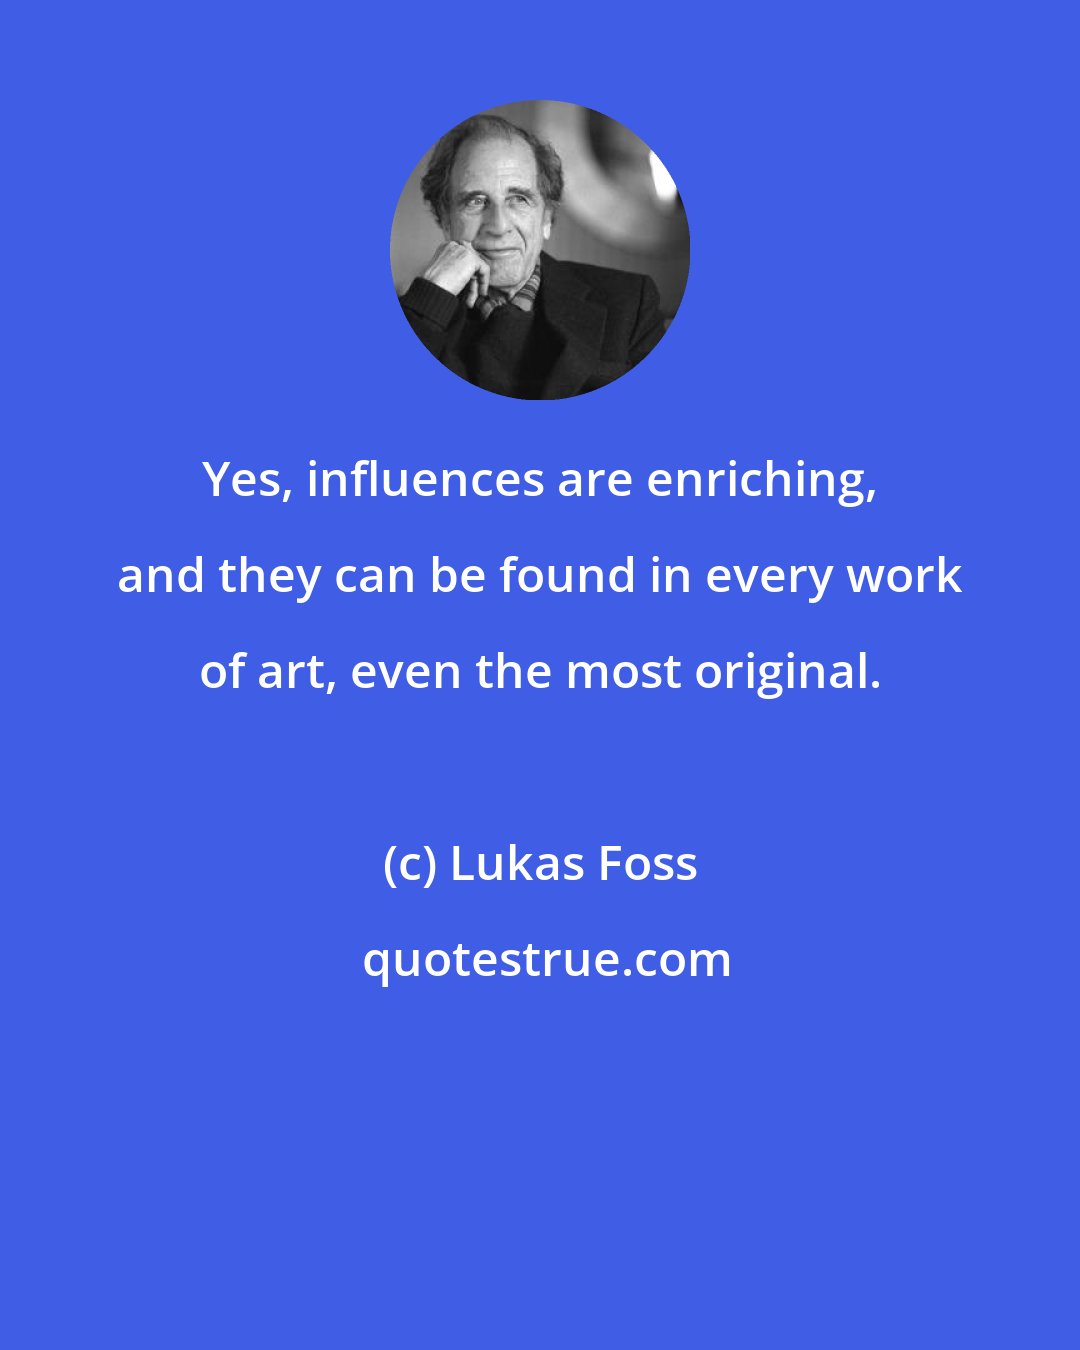 Lukas Foss: Yes, influences are enriching, and they can be found in every work of art, even the most original.